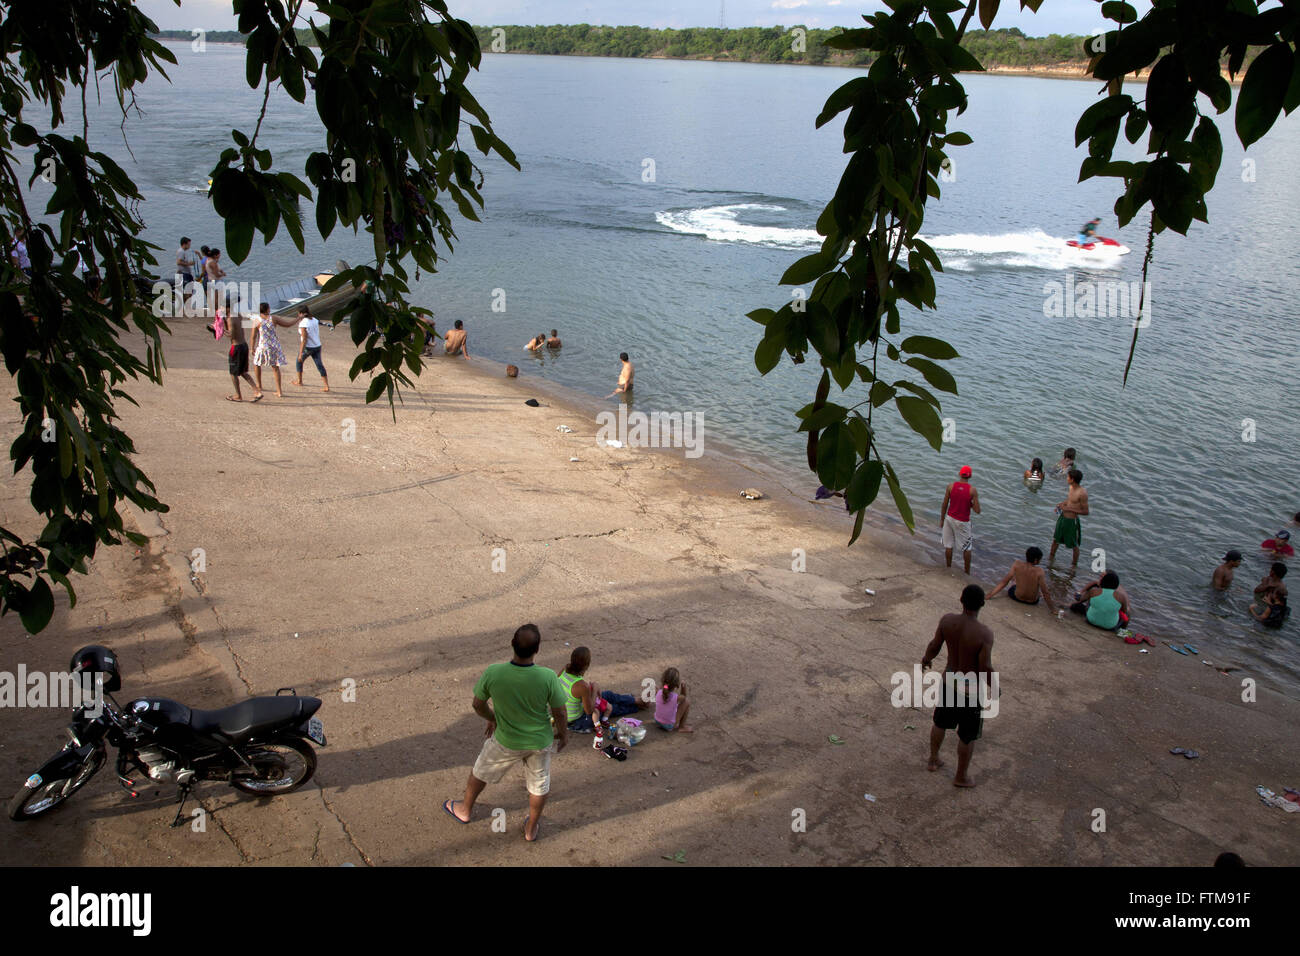 Population of the town of Fish tomanho bathroom on the Tocantins River Stock Photo